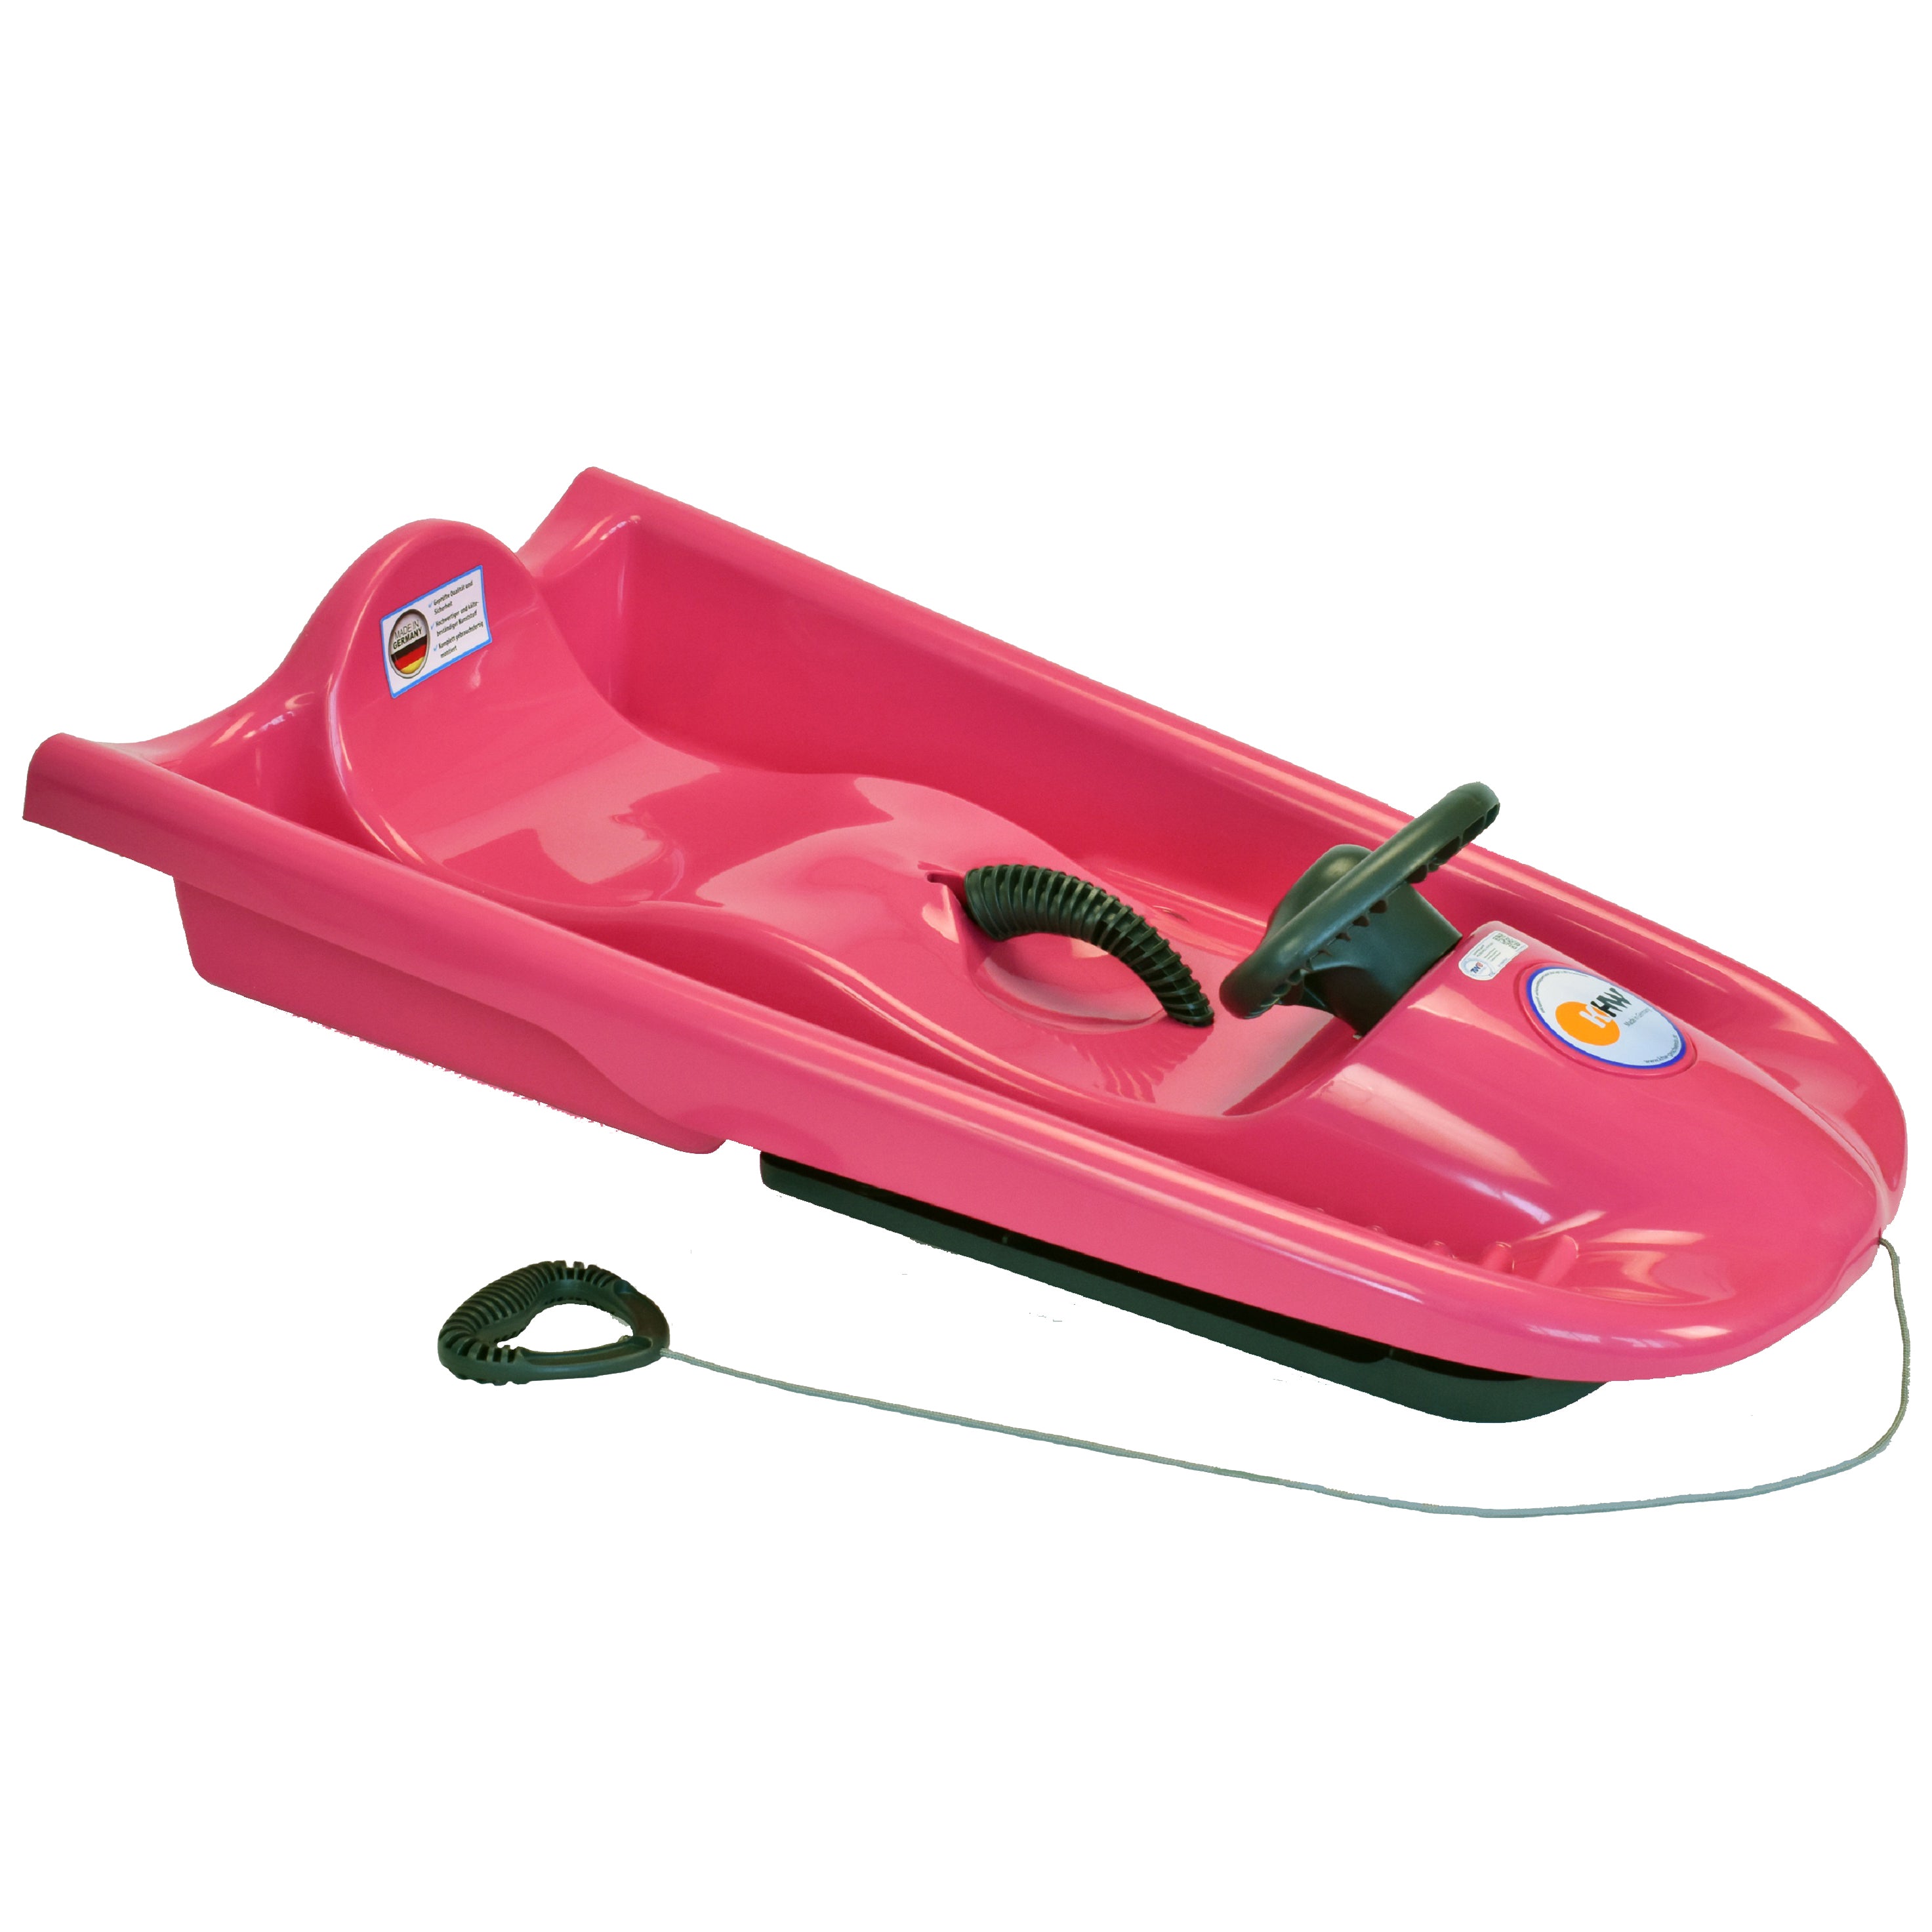 high quality snow sled made in germany with built in breaks and steering